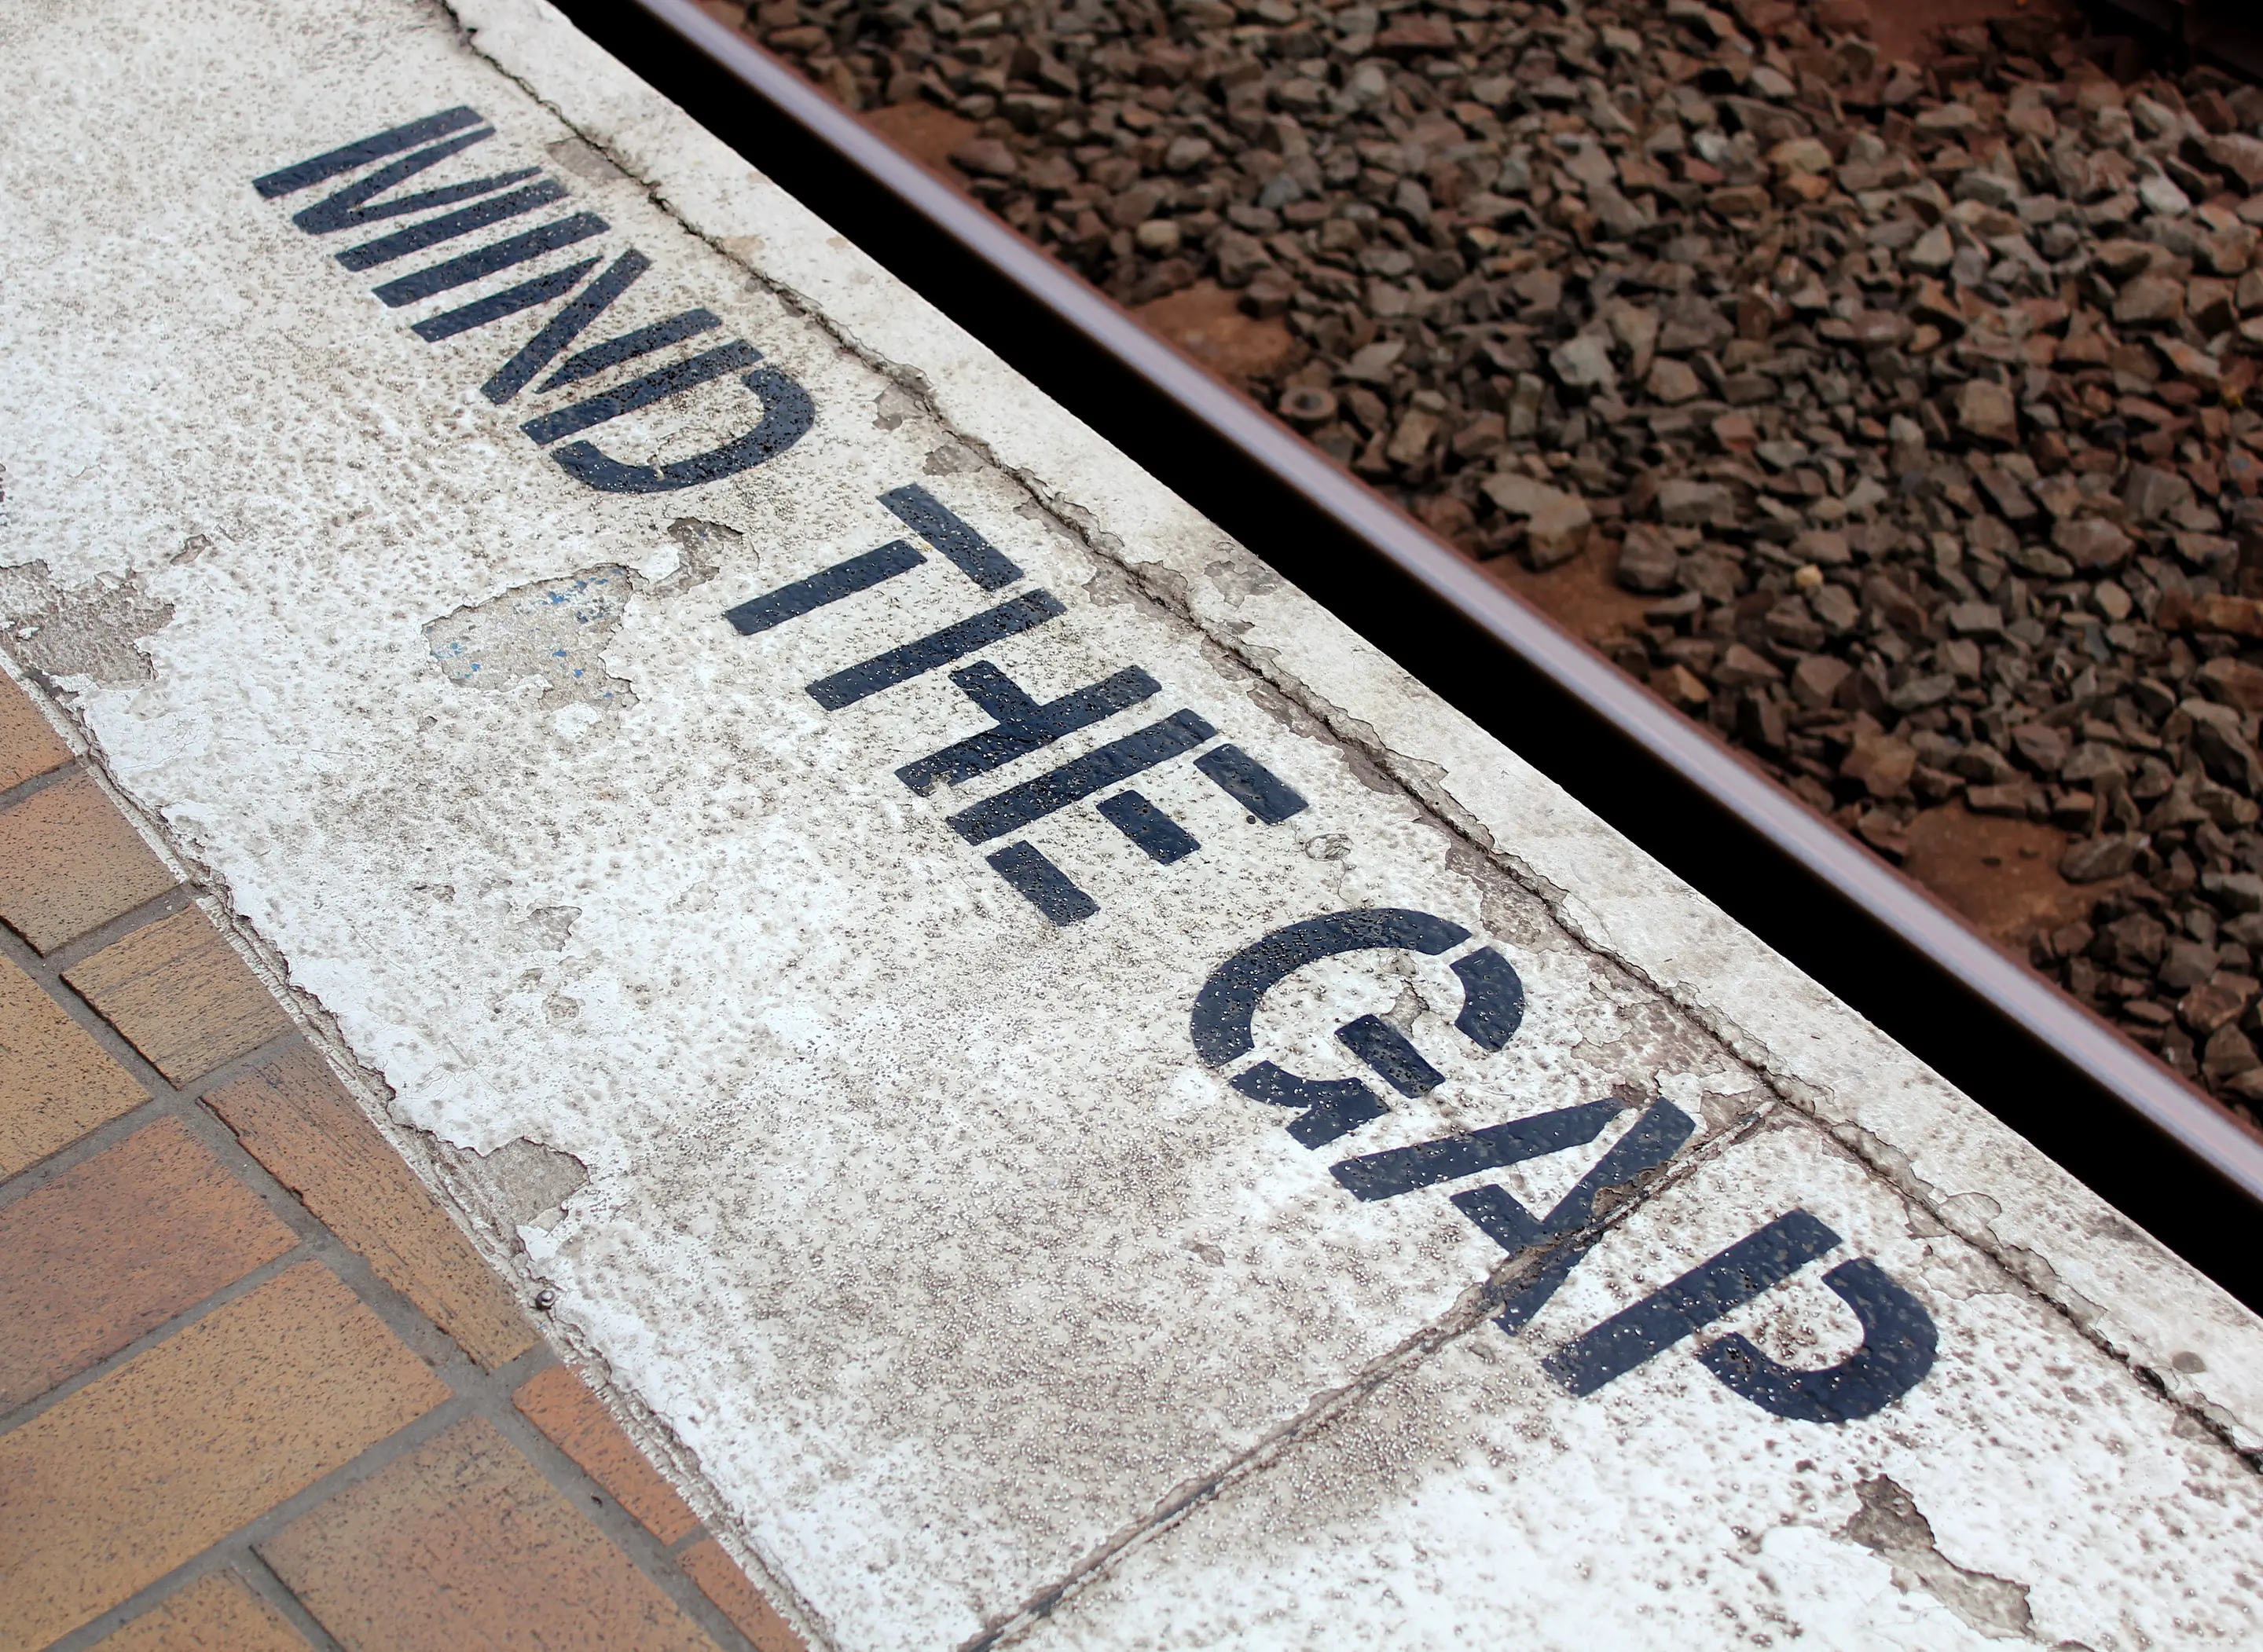 Platform with the phrase "Mind the Gap" printed on it